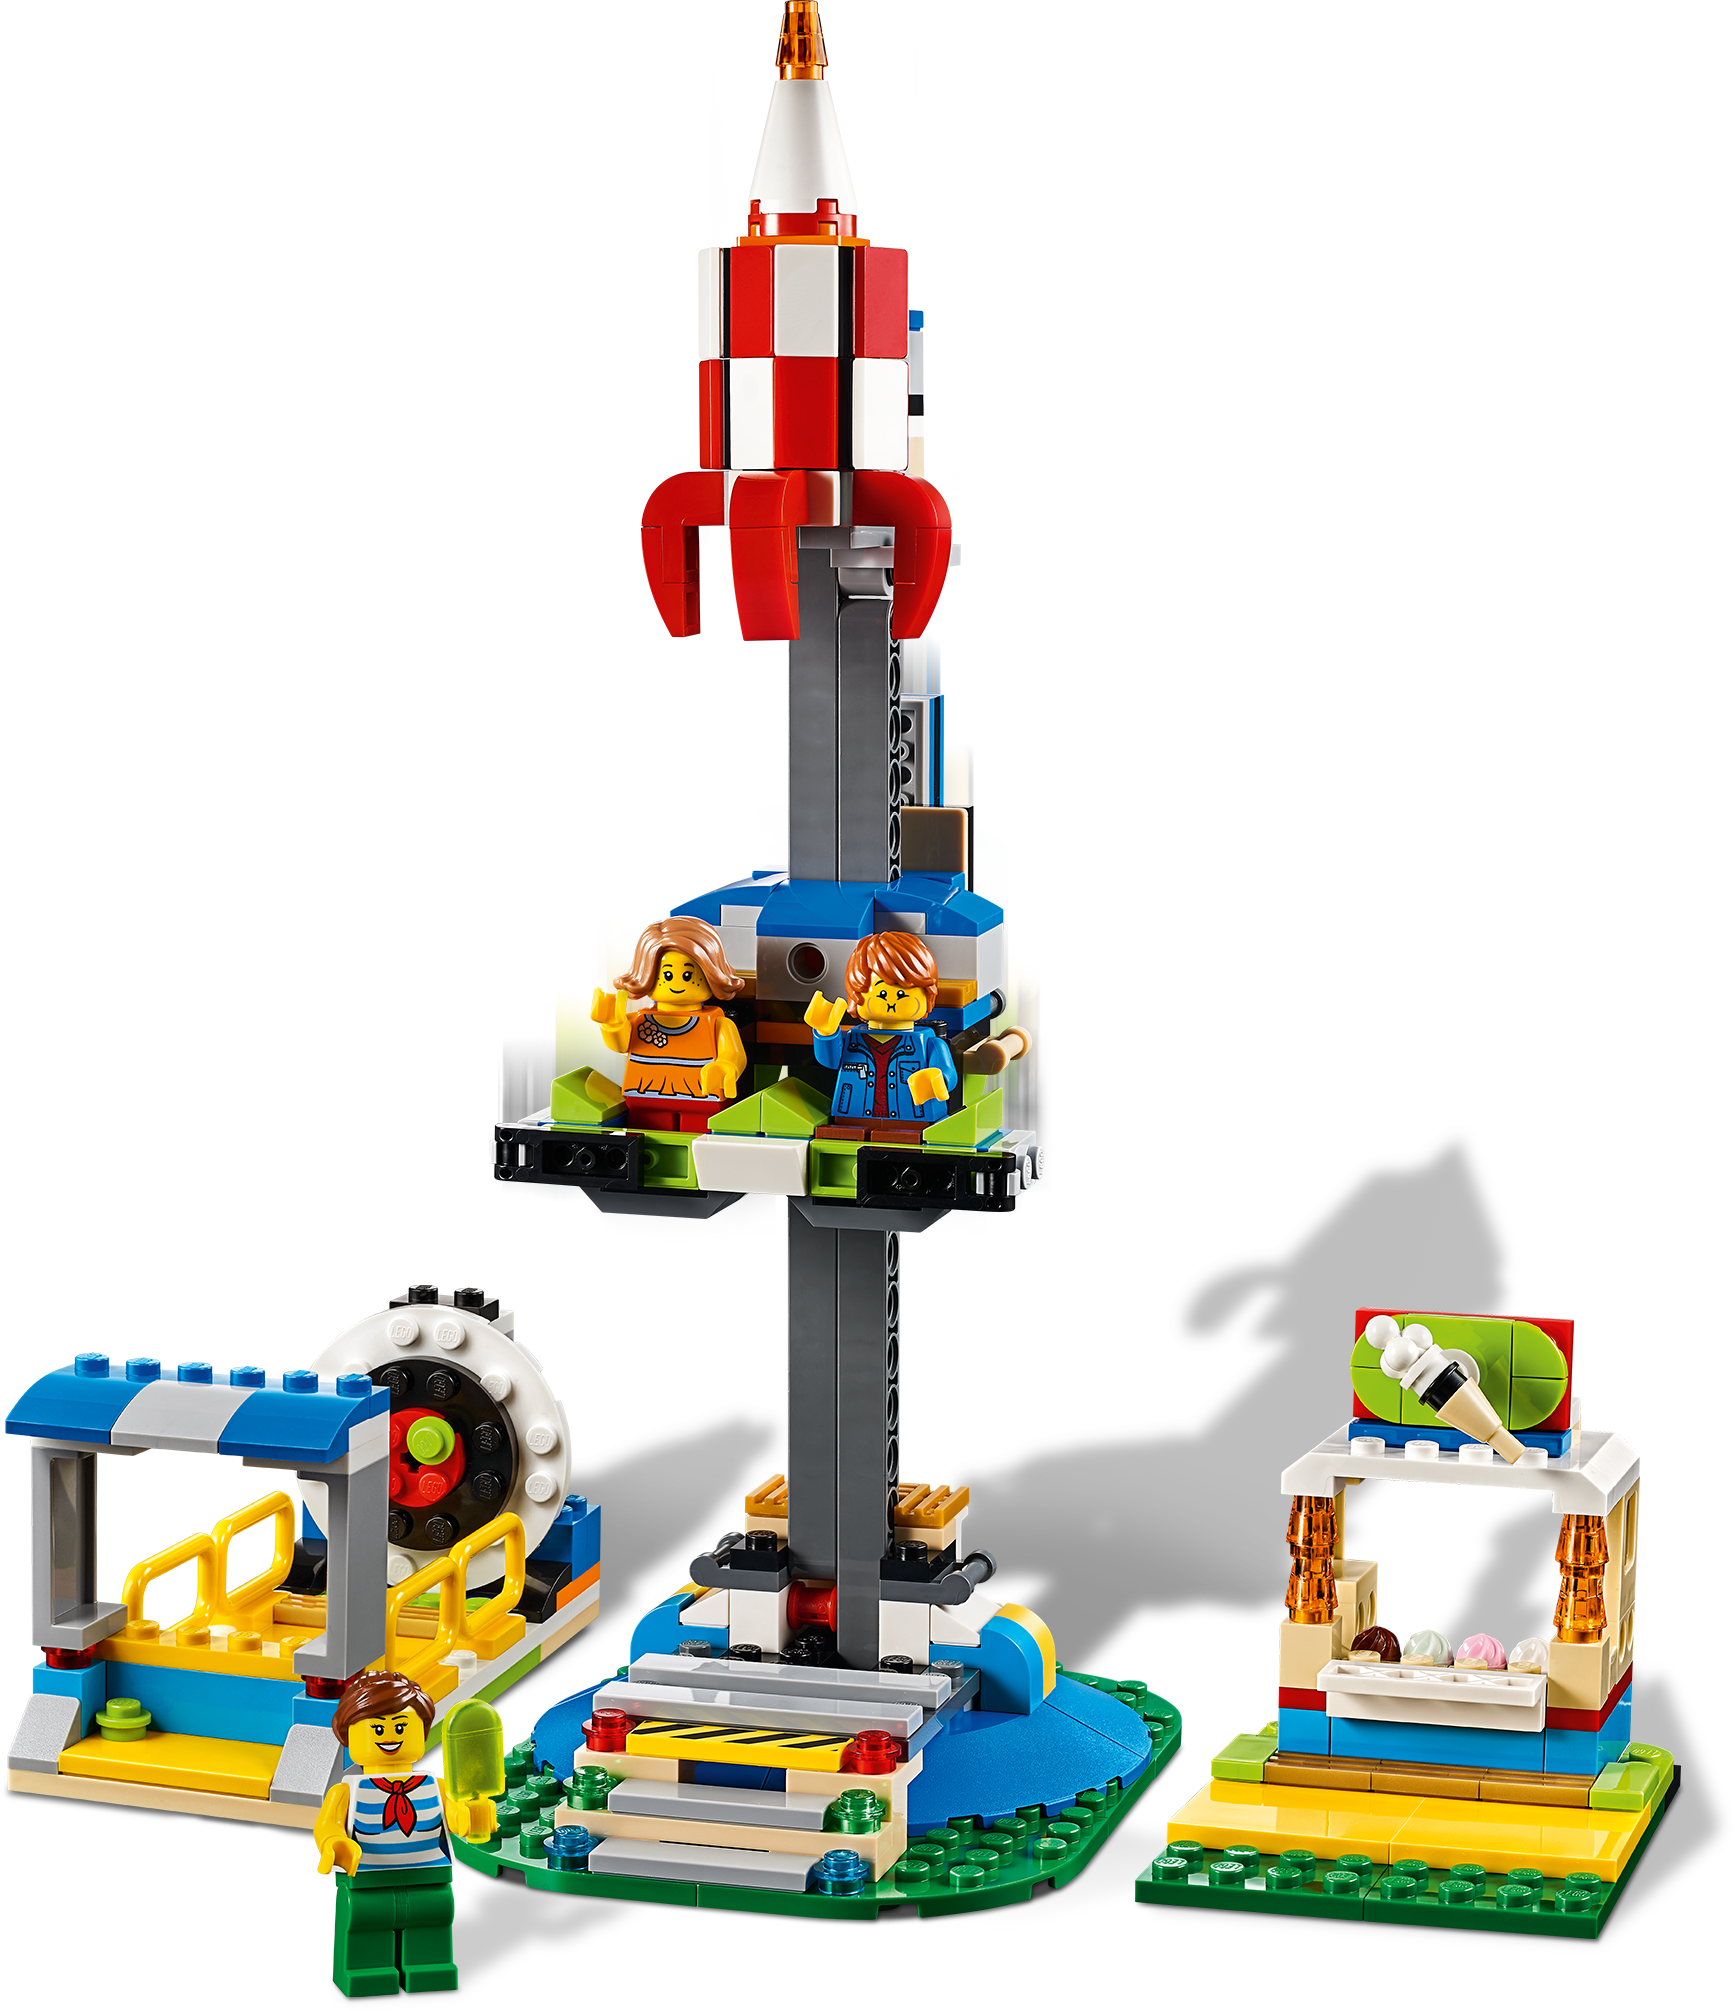 LEGO Creator Fairground Carousel 31095 Space-Themed Building Kit (595 Pieces) - image 4 of 8